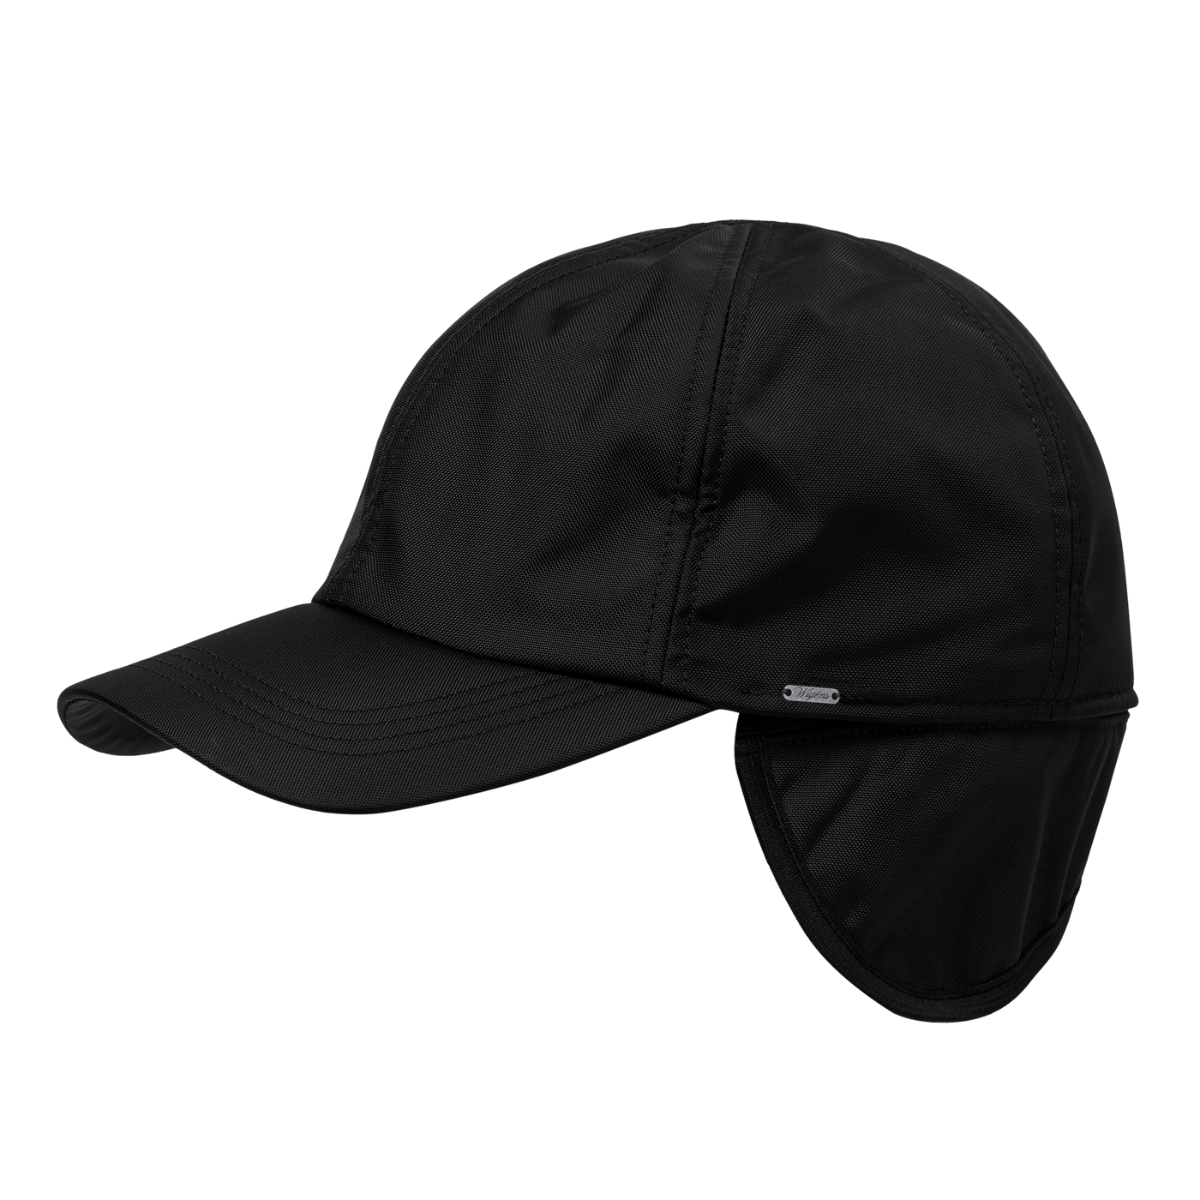 Wind Stopper Baseball Classic Cap with Earflaps and Pile Lining in Sport Twill (Choice of Colors) by Wigens